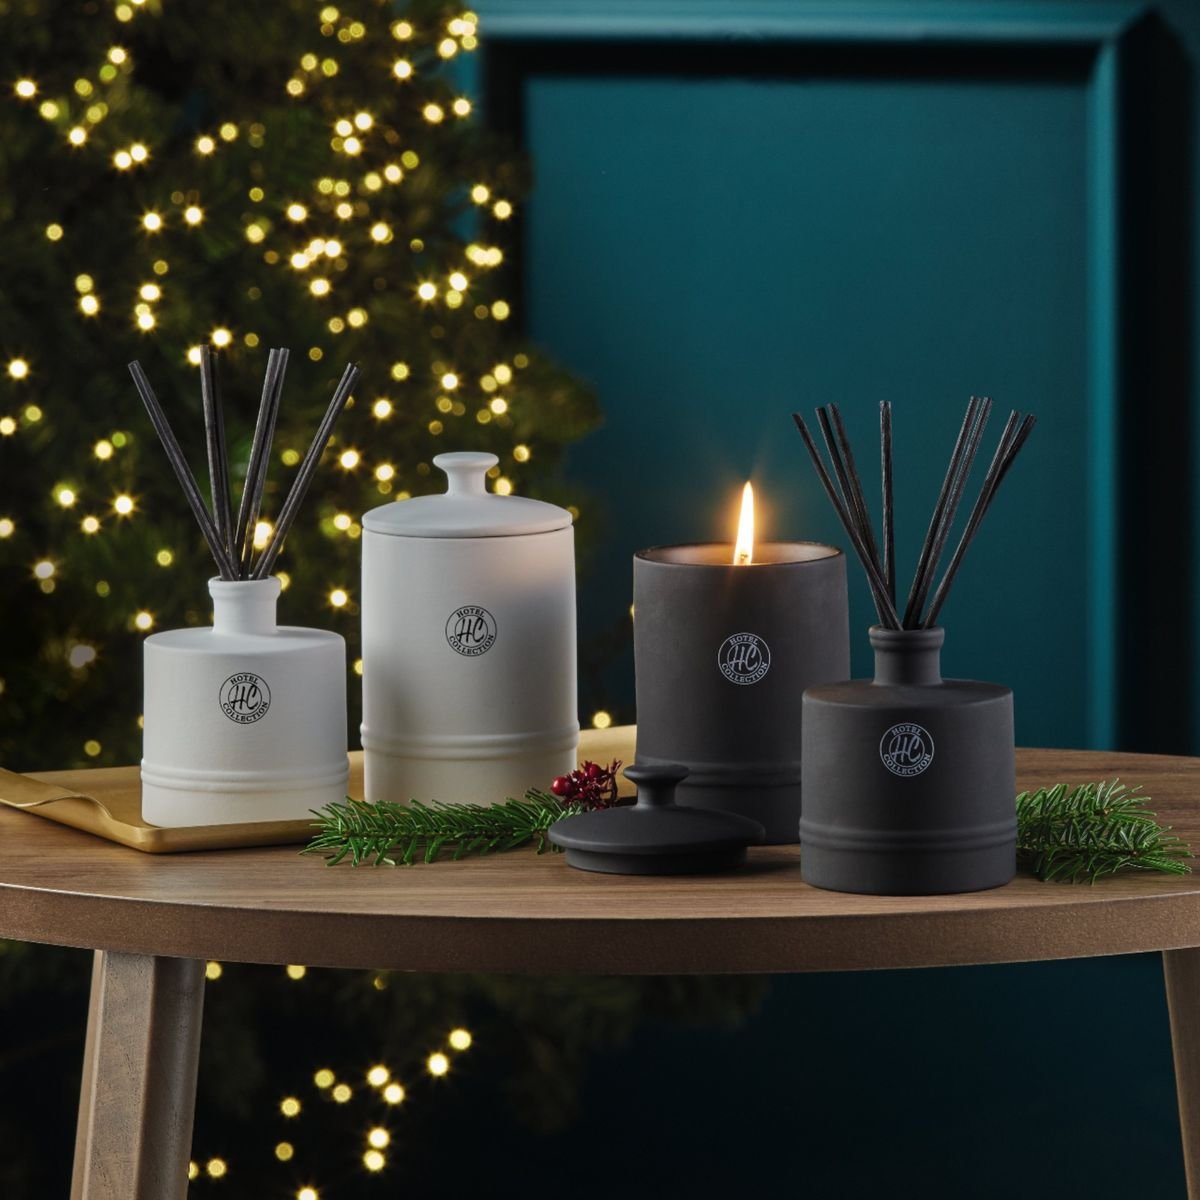 Aldi's glowing fire candle smells just like a cosy fireplace and it's less than £10